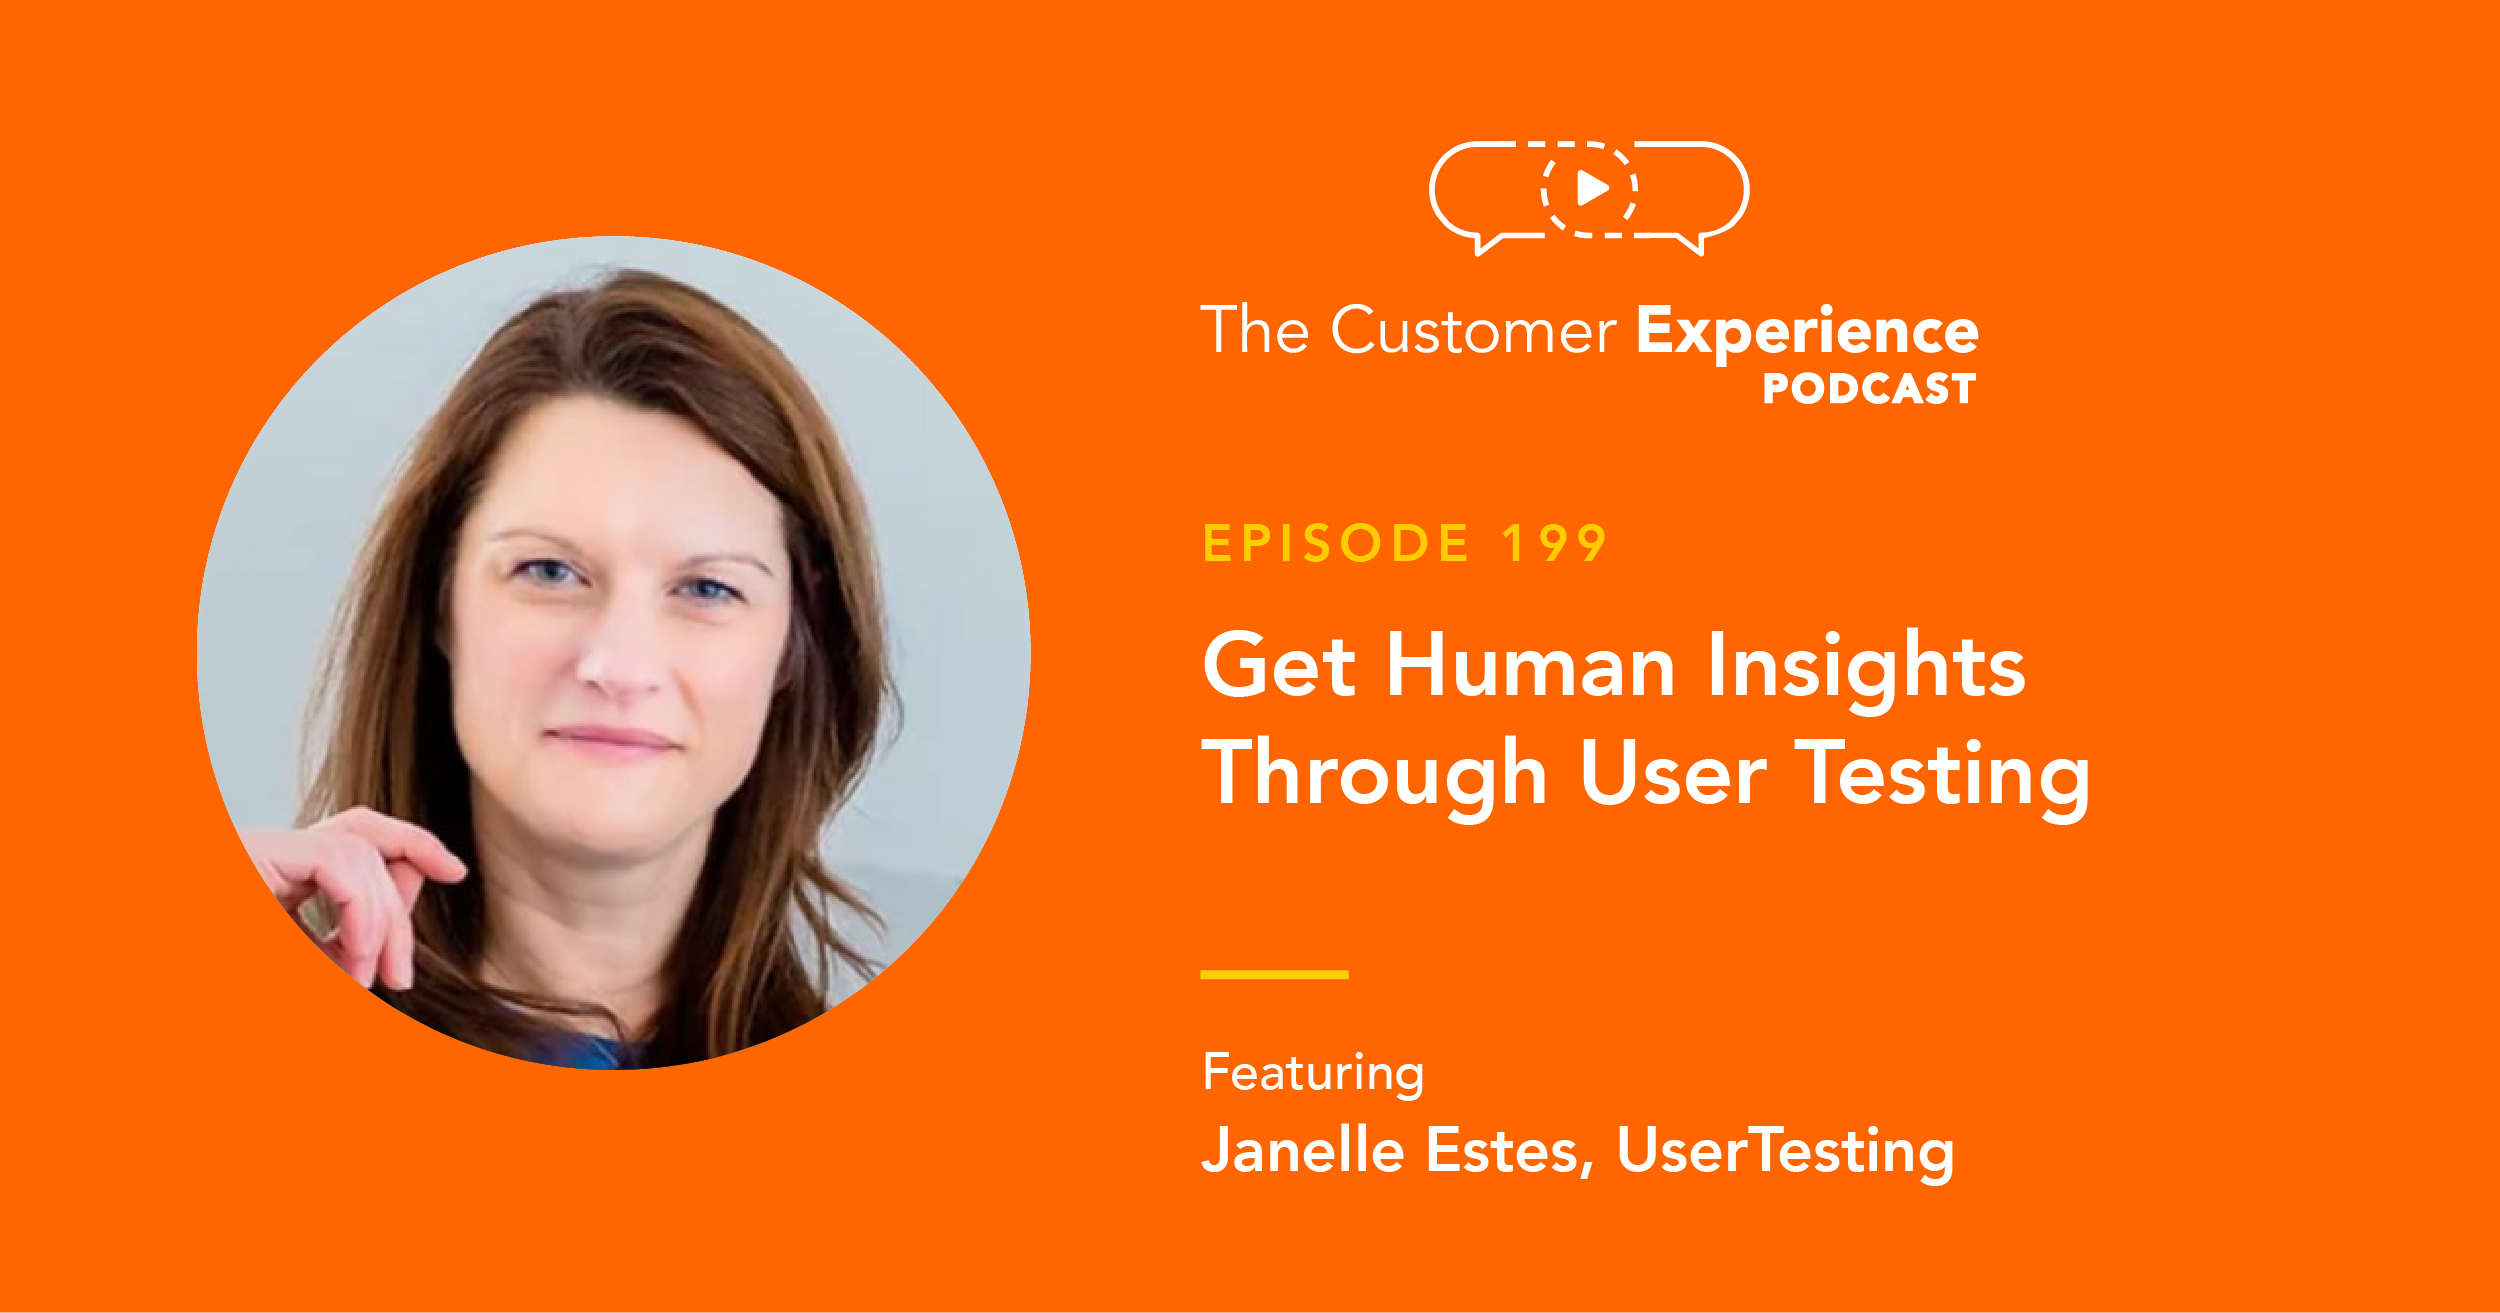 Janelle Estes, User Testing, User Tested, The Customer Experience Podcast, UX, user experience, UserTesting, UserTested, user test, customer feedback, human insight, human insights